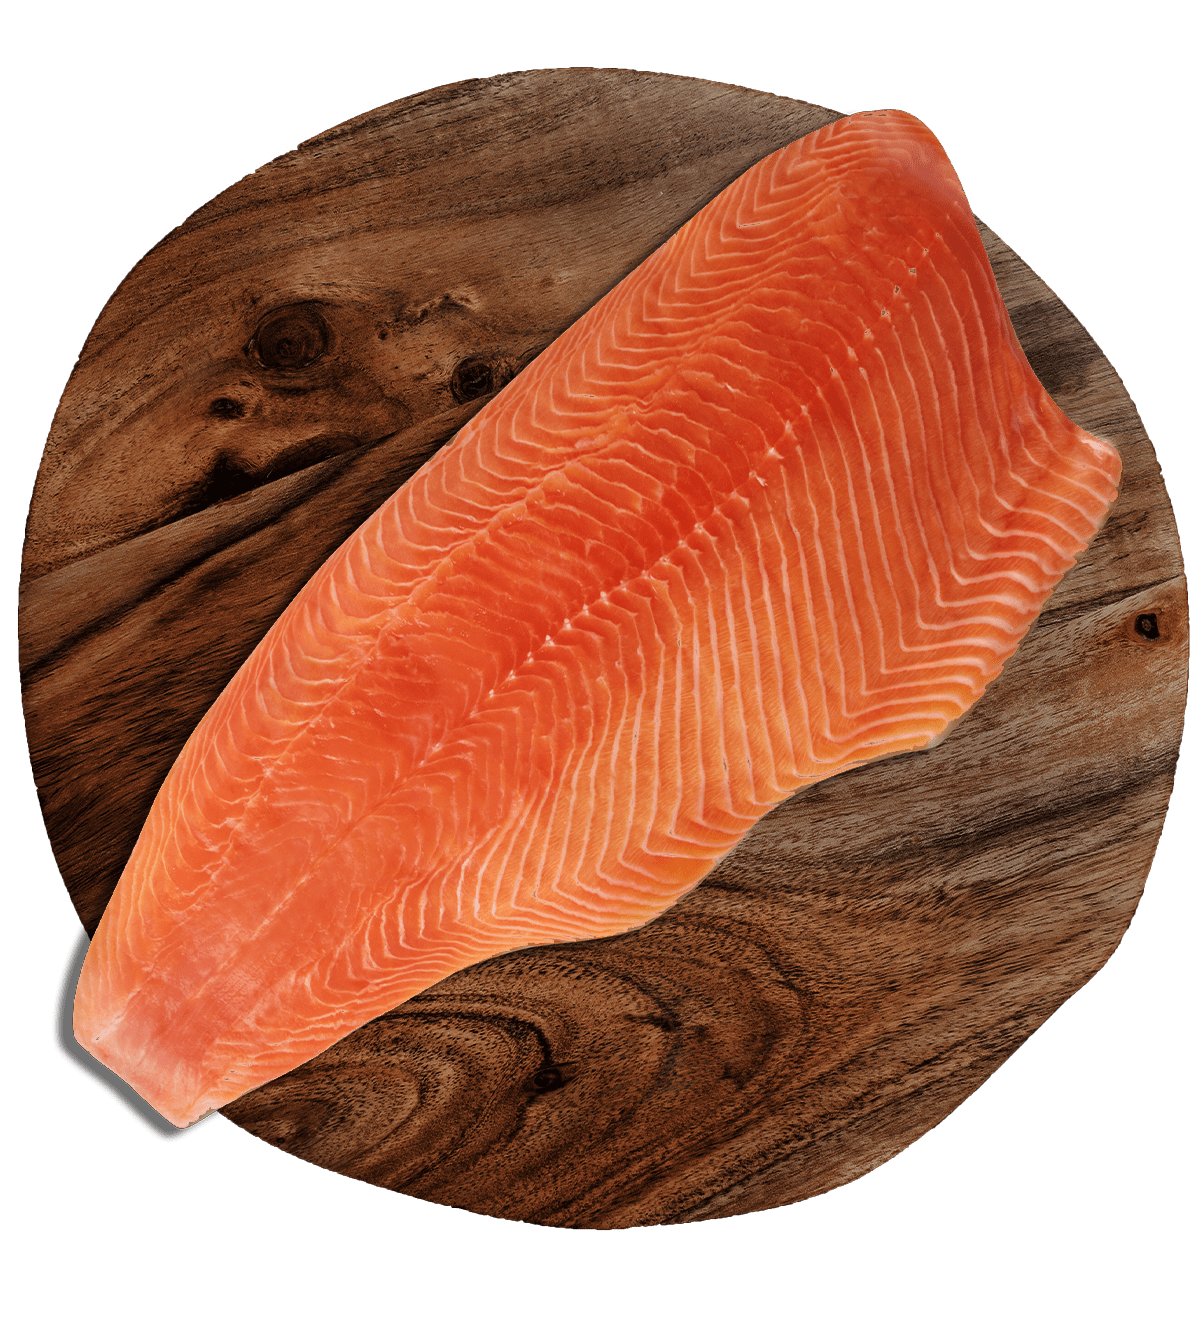 Smoked salmon of the highest quality